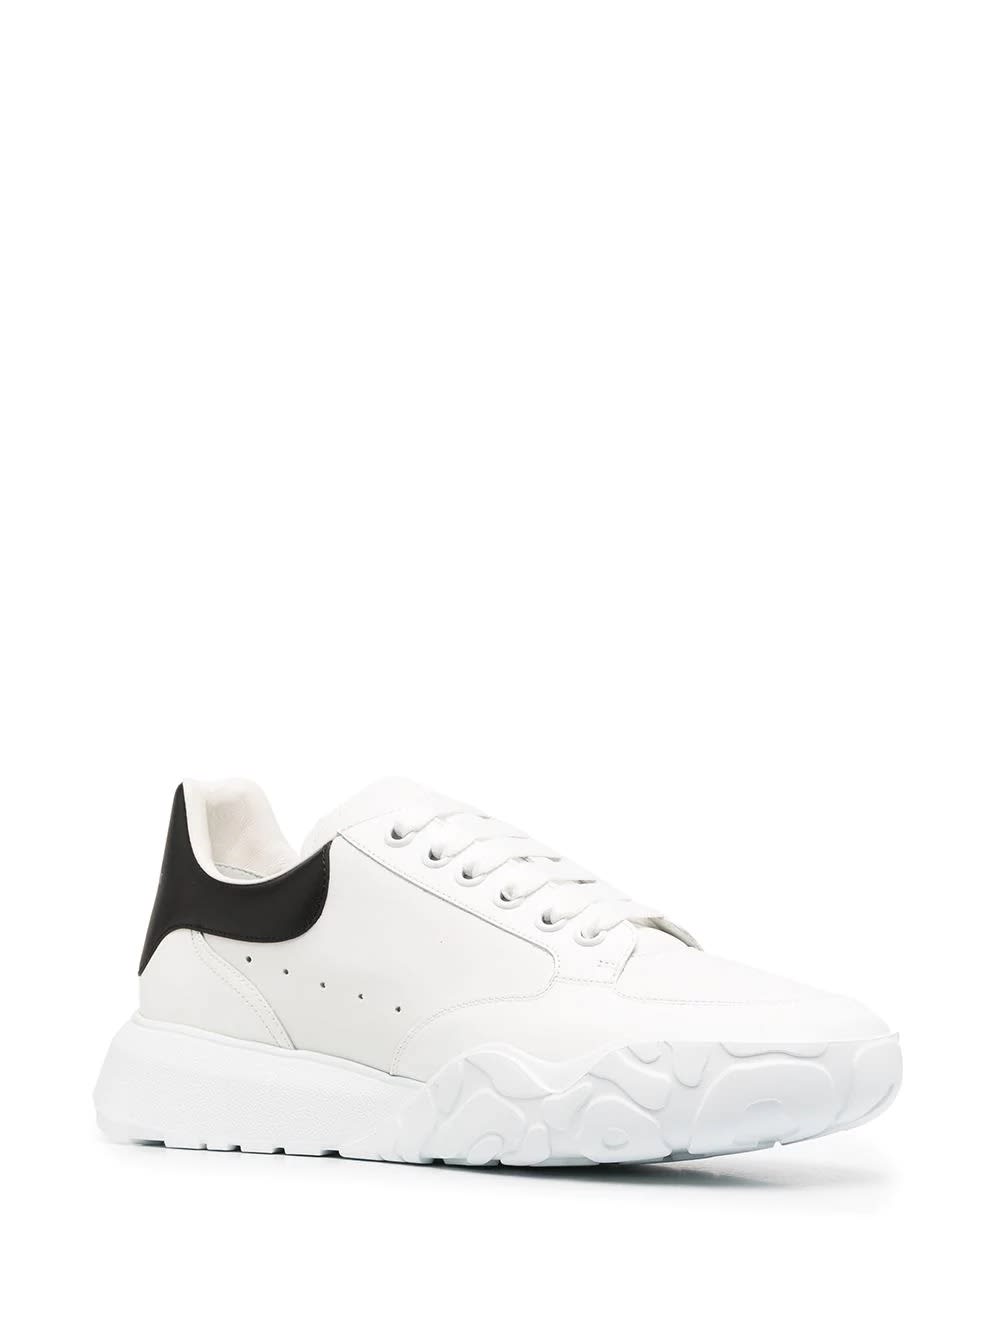 Shop Alexander Mcqueen Trainer Court Oversize Sneakers In White And Black